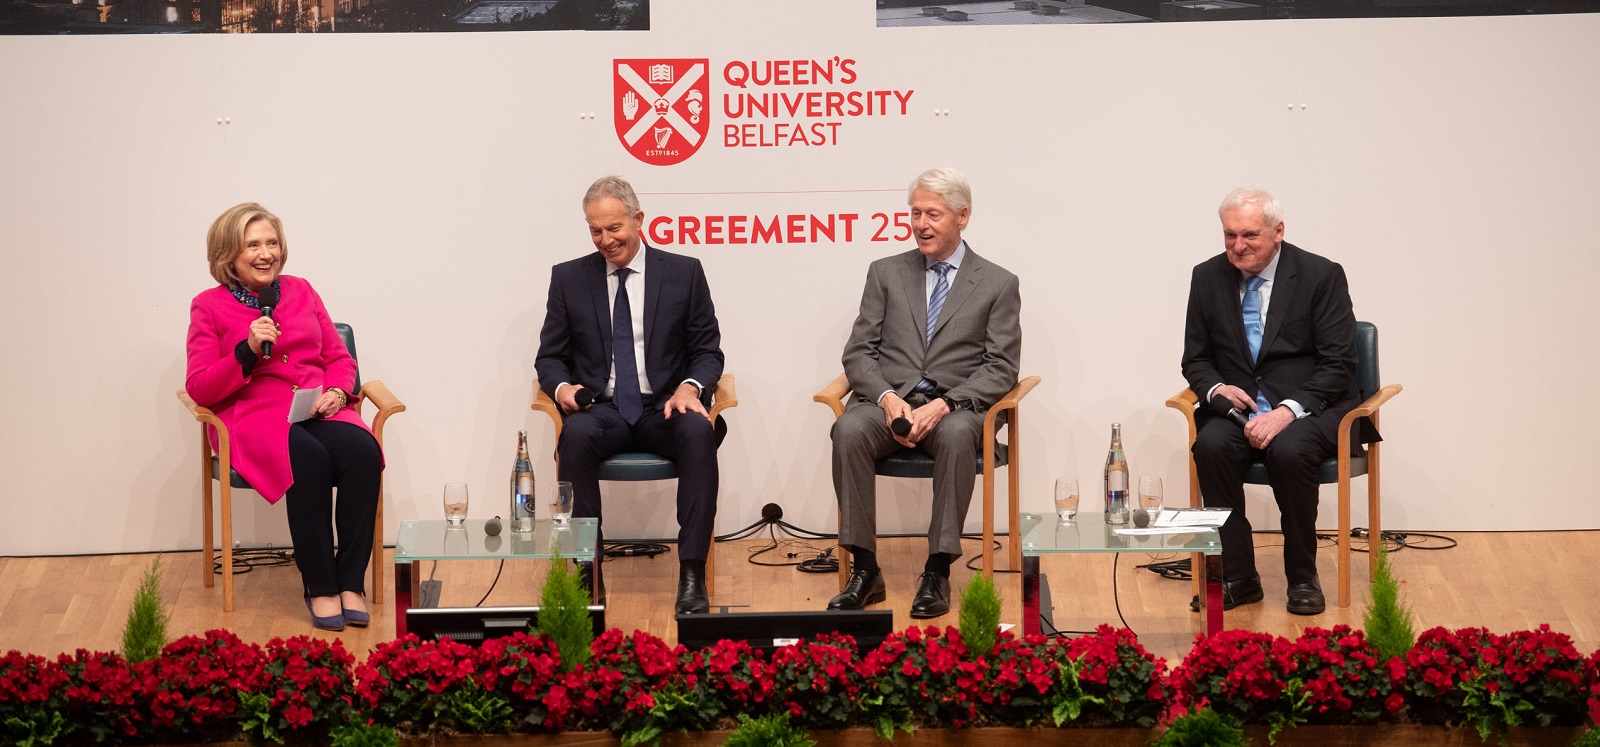 BLOG: Agreement 25 – How Queen’s is helping to build a peaceful ...